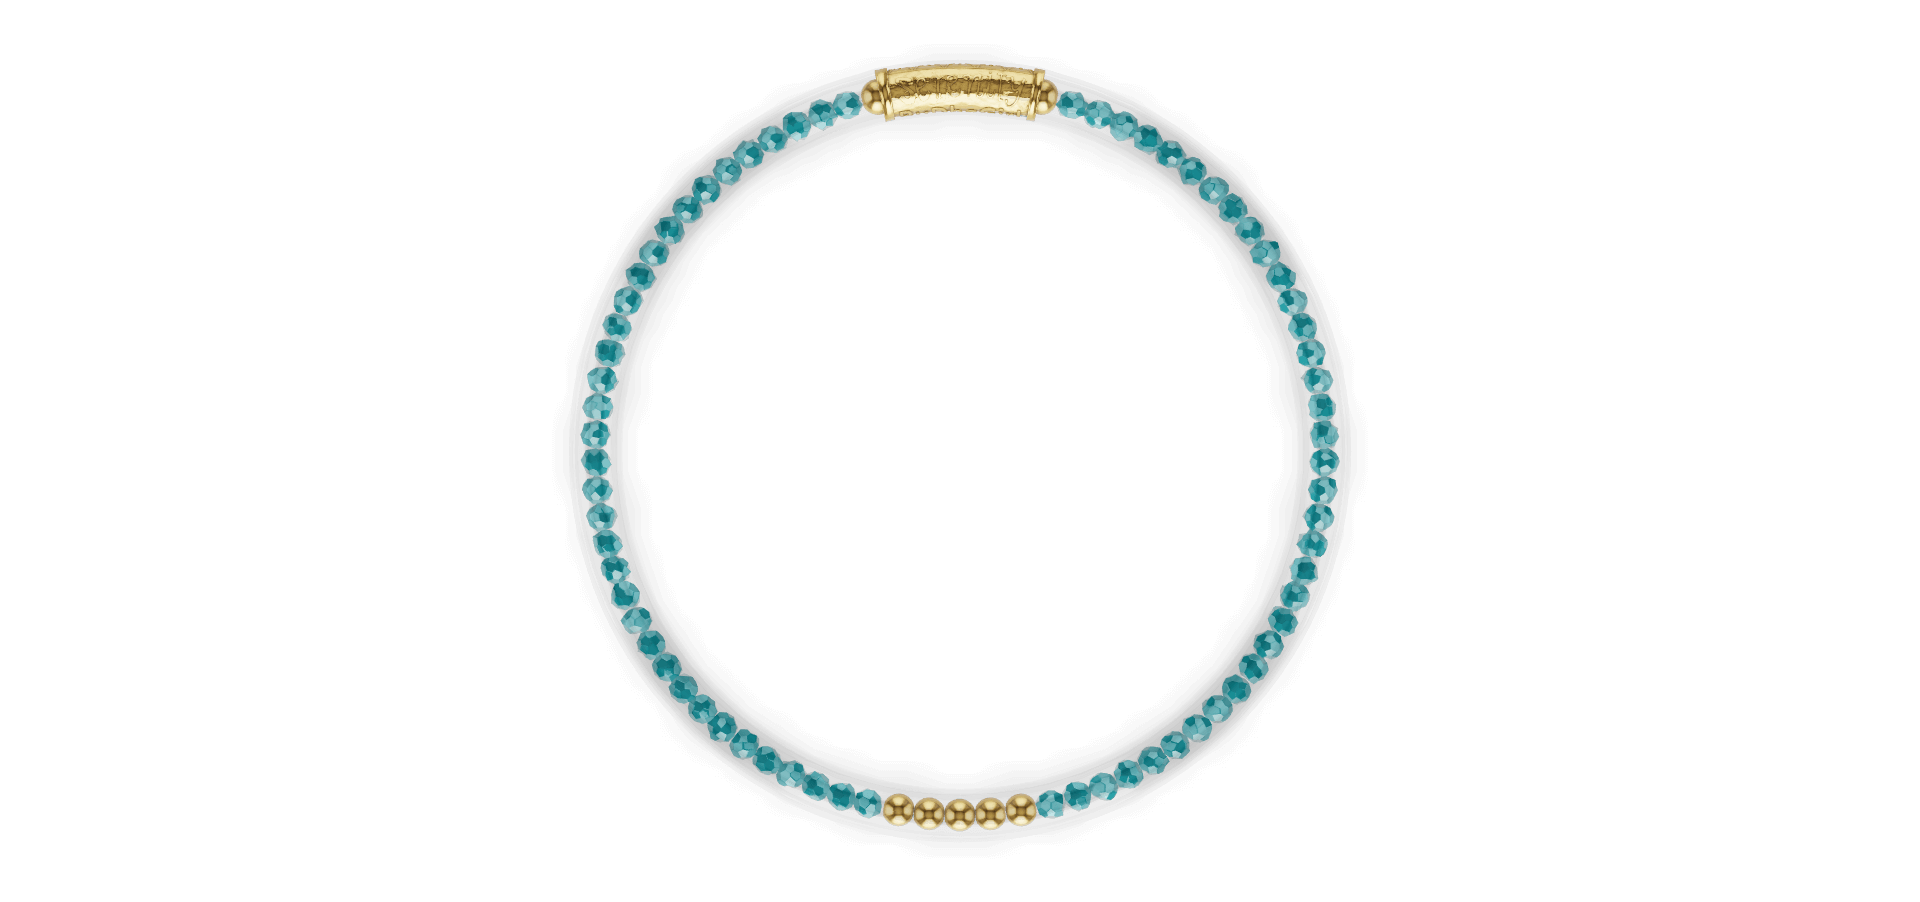 Blue Apatite Crystal | Luxe Bangles and Bracelets | BuDhaGirl